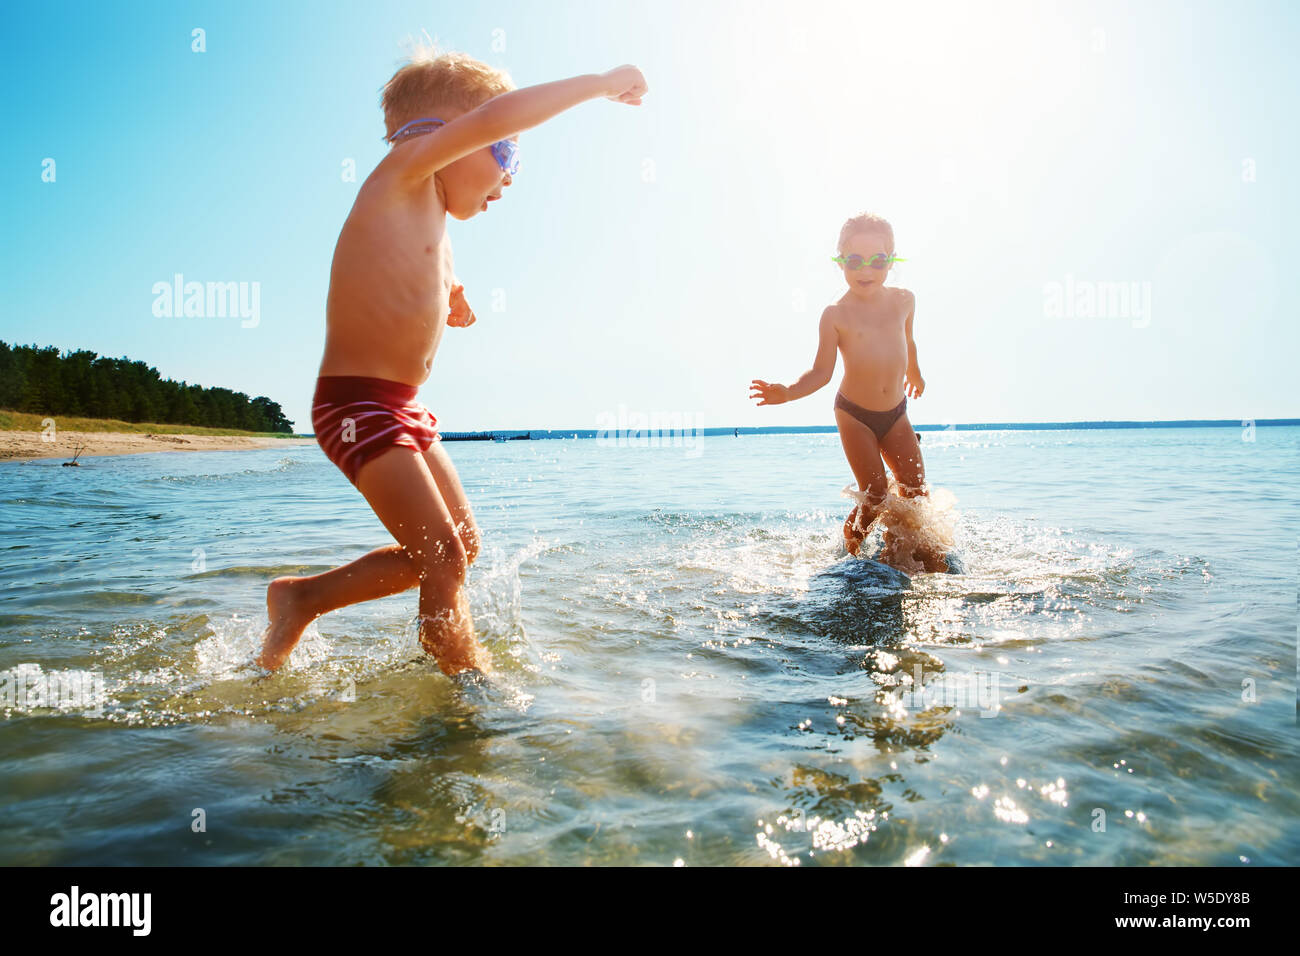 Boy and girl playing on the beach Banque D'Images